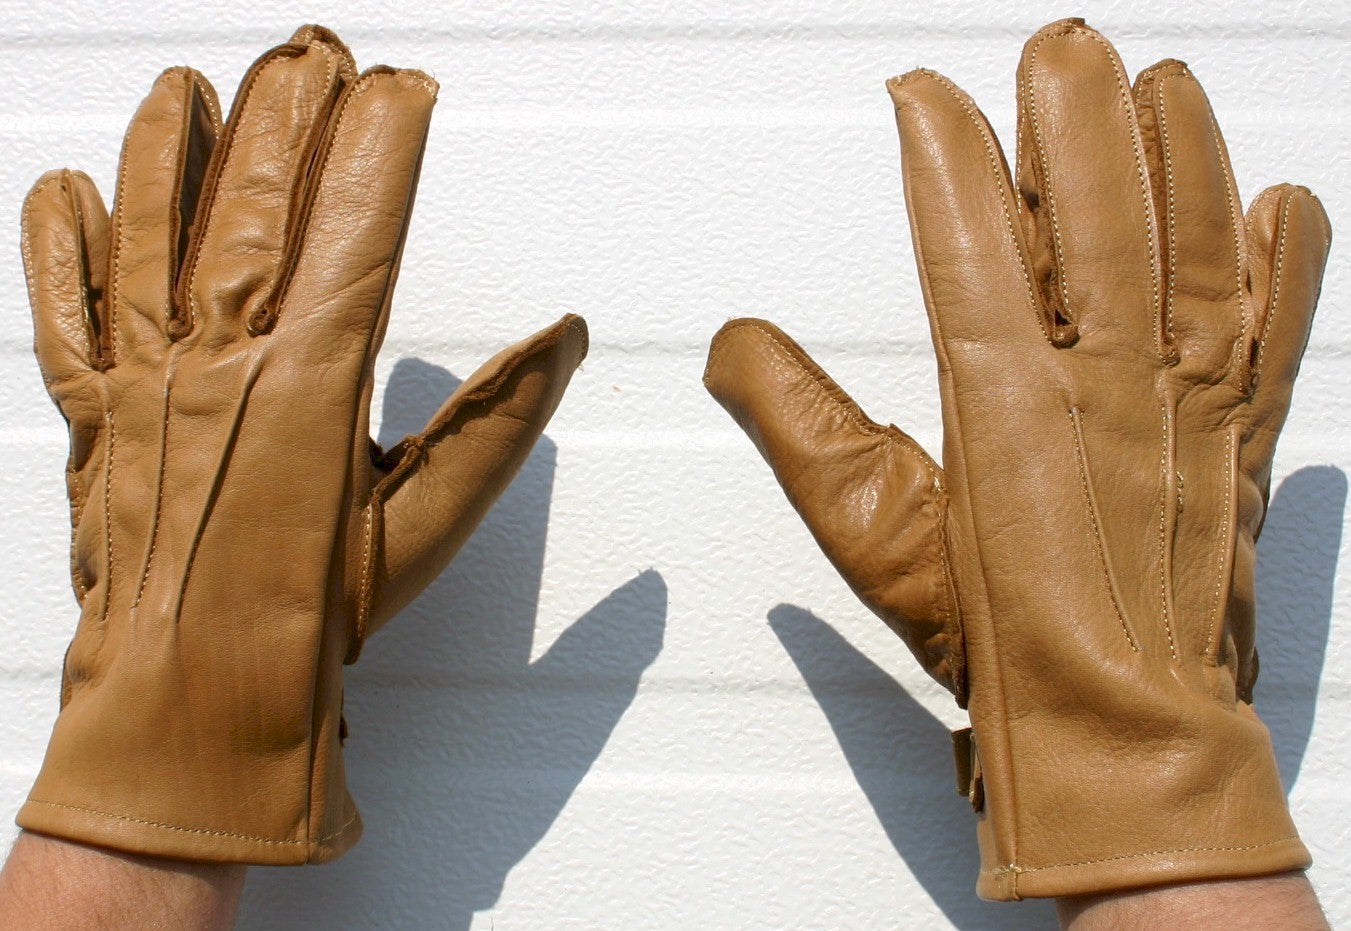 How To Care For Your Leather Gloves